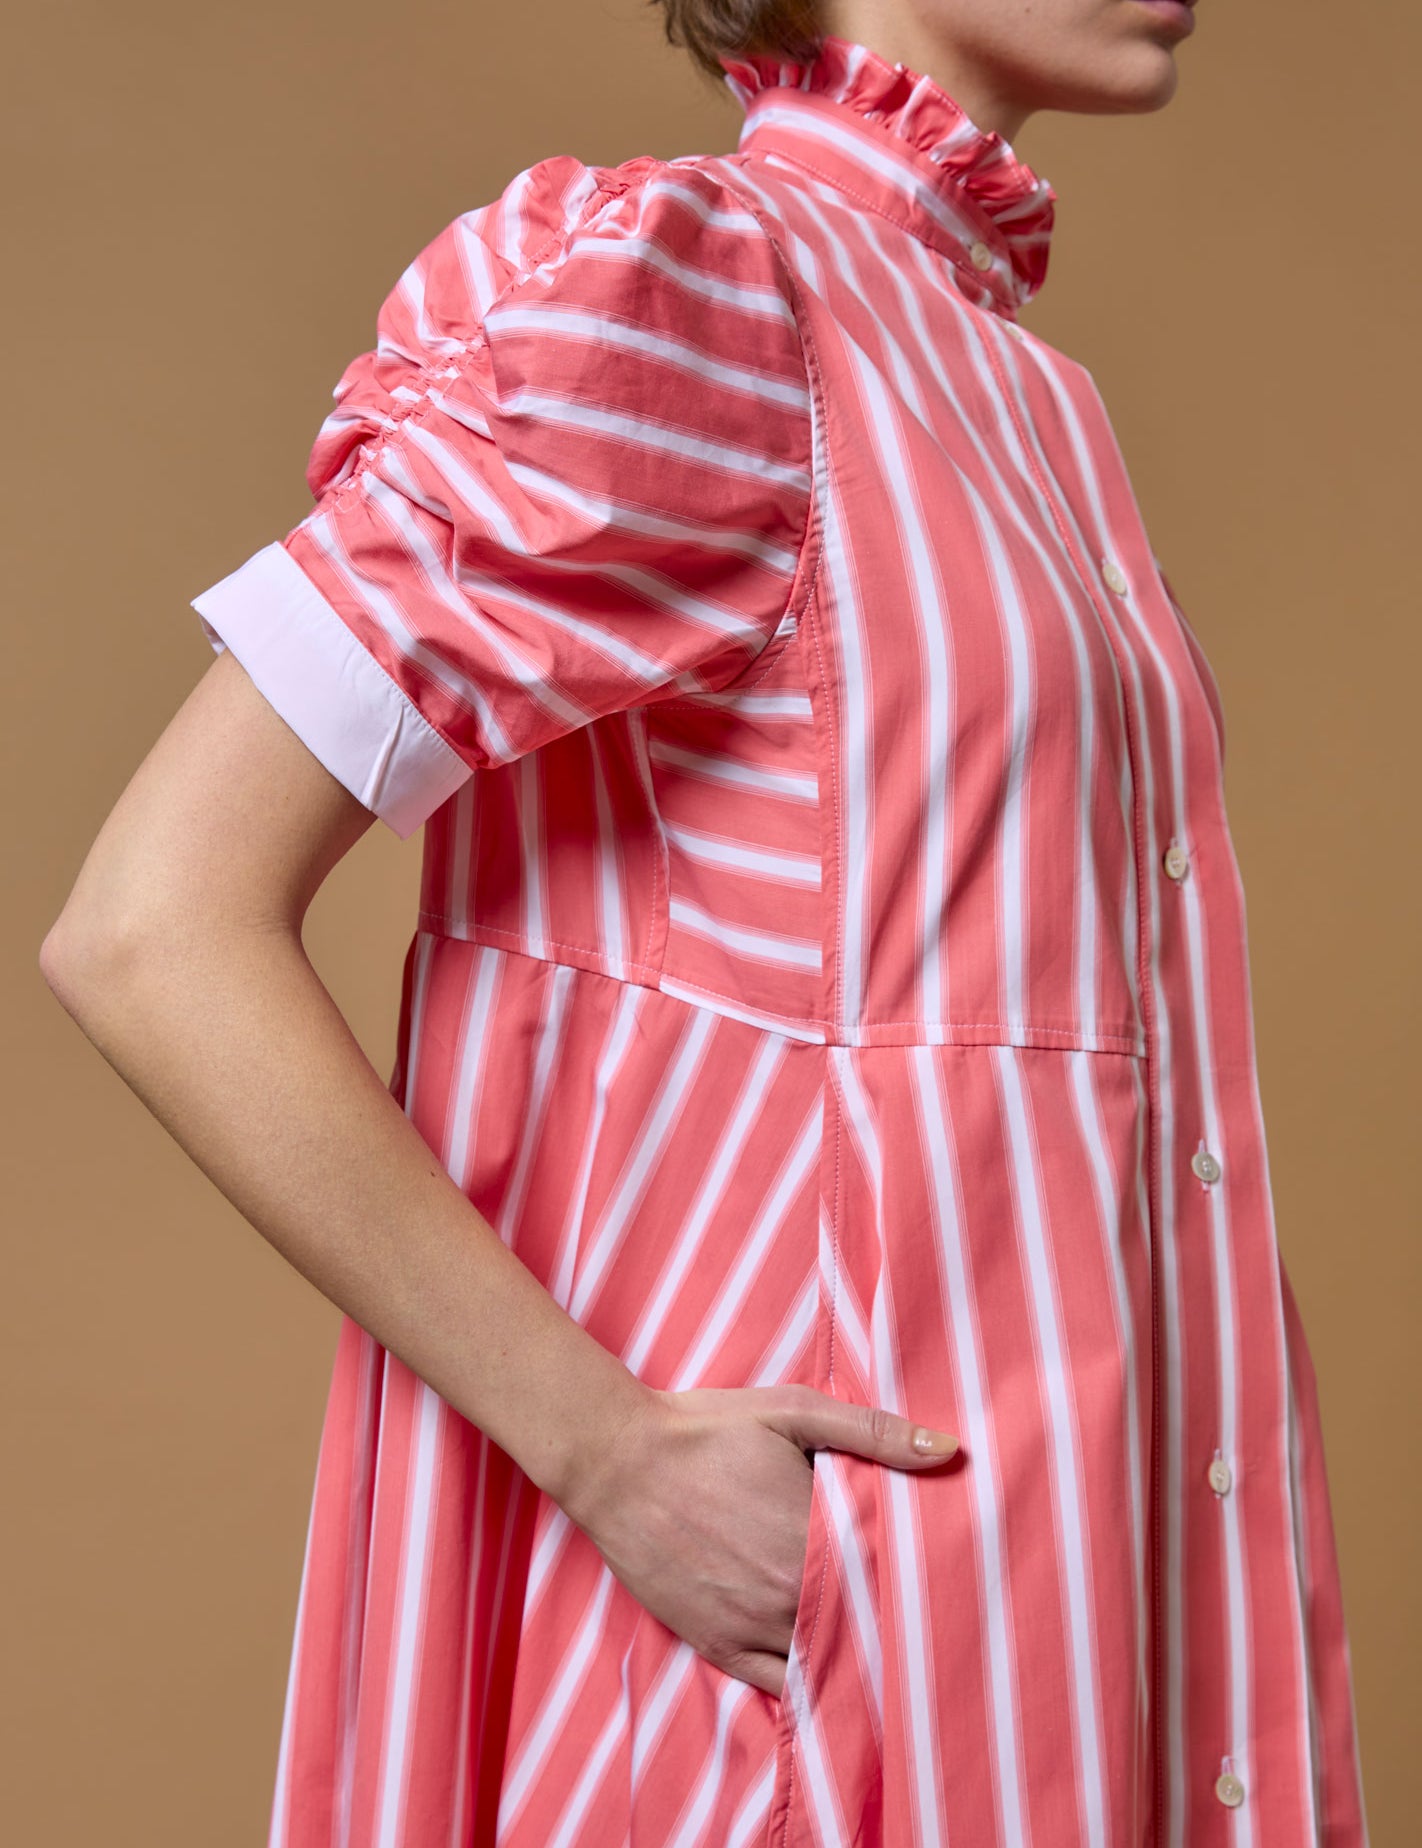 Sleeve close up - Venetia Coral Dress - Downing Poplin - Thierry Colson